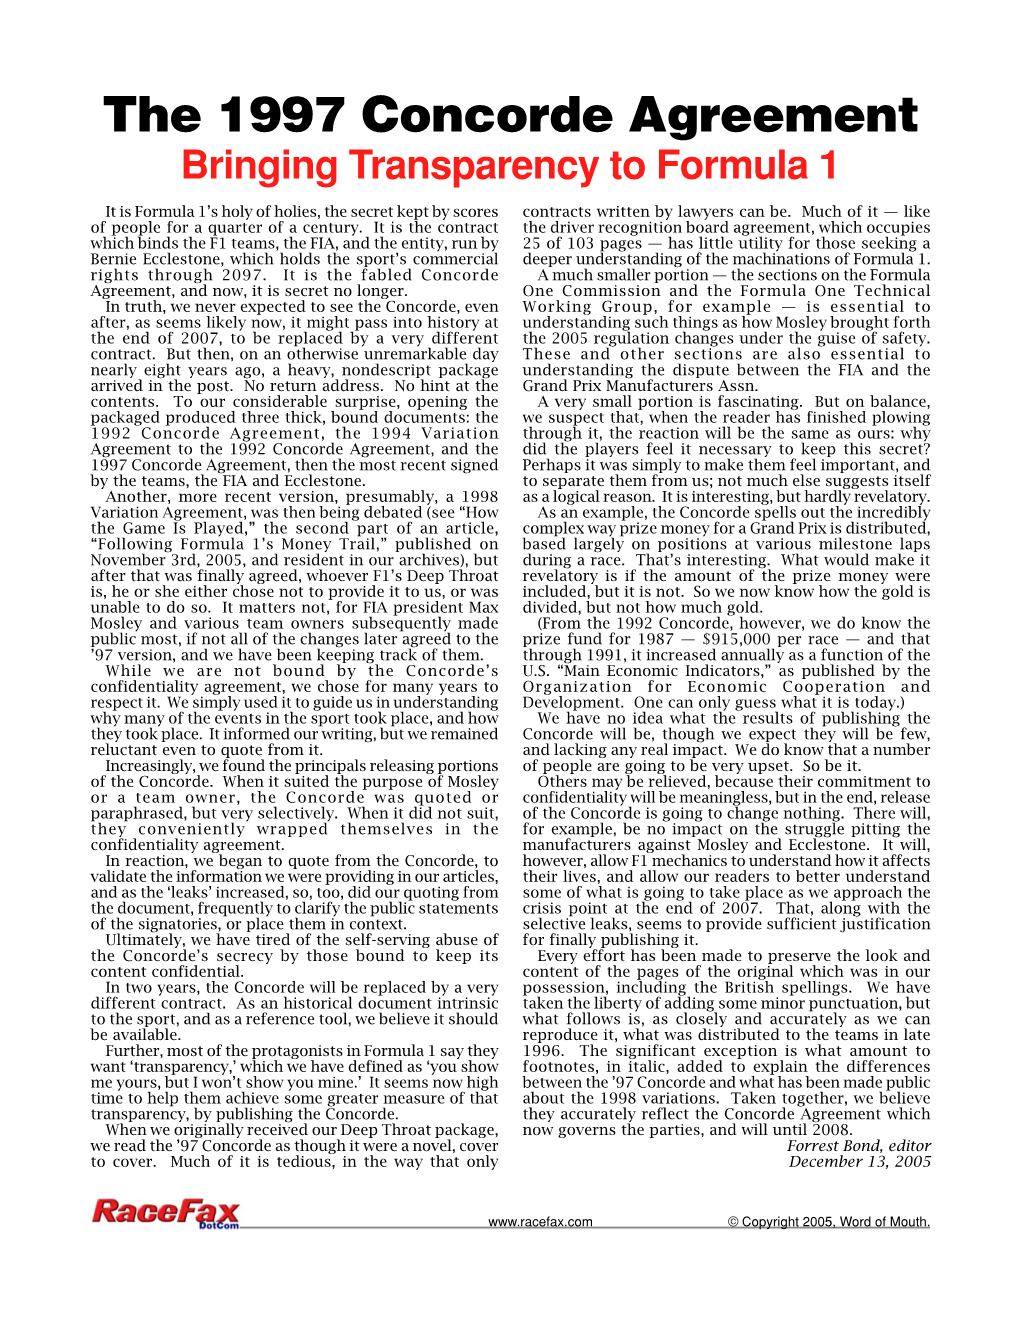 The 1997 Concorde Agreement Bringing Transparency to Formula 1